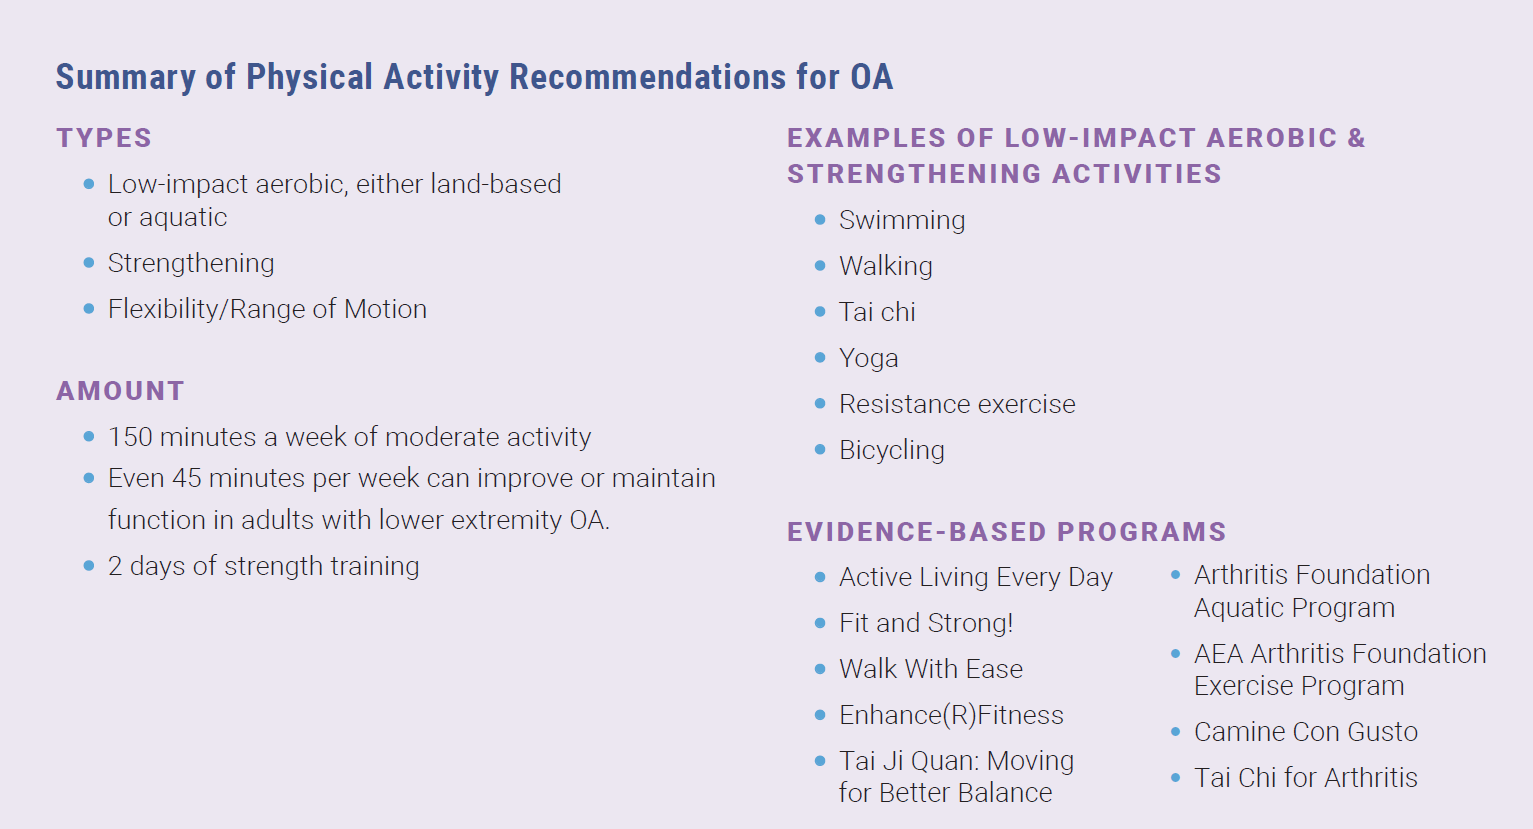 summary of physical activity recommendations for OA